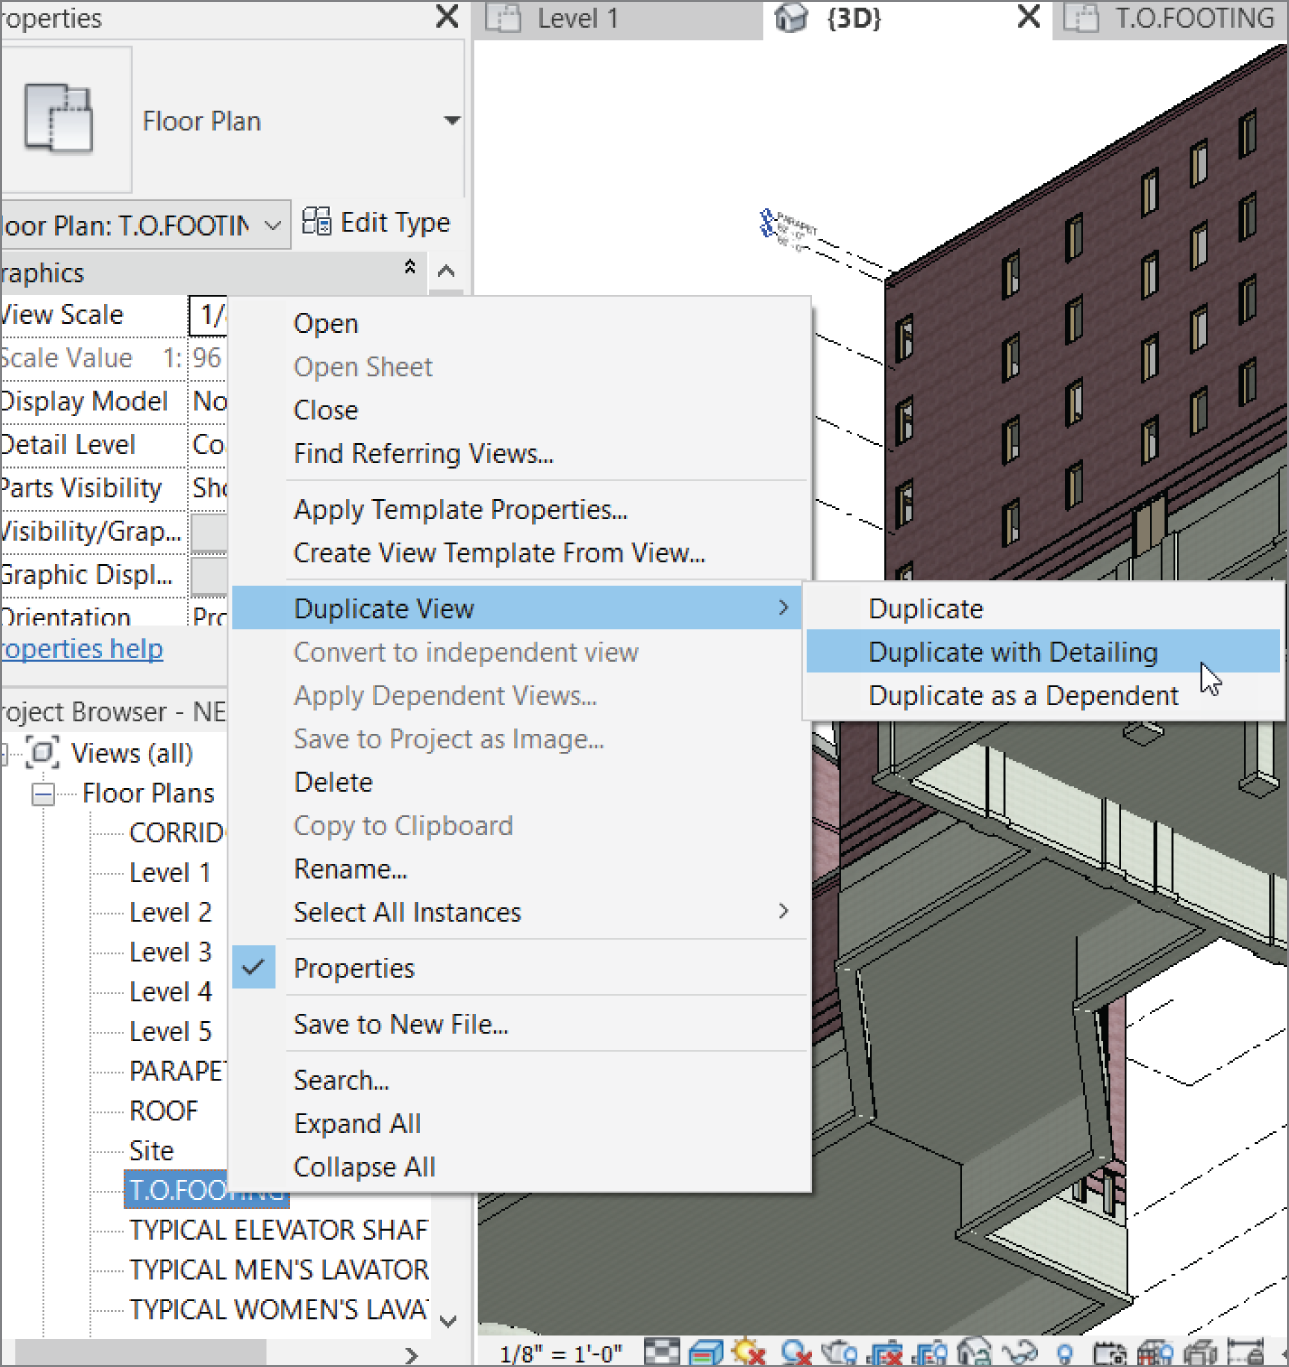 Selecting Duplicate View ➣ Duplicate With Detailing